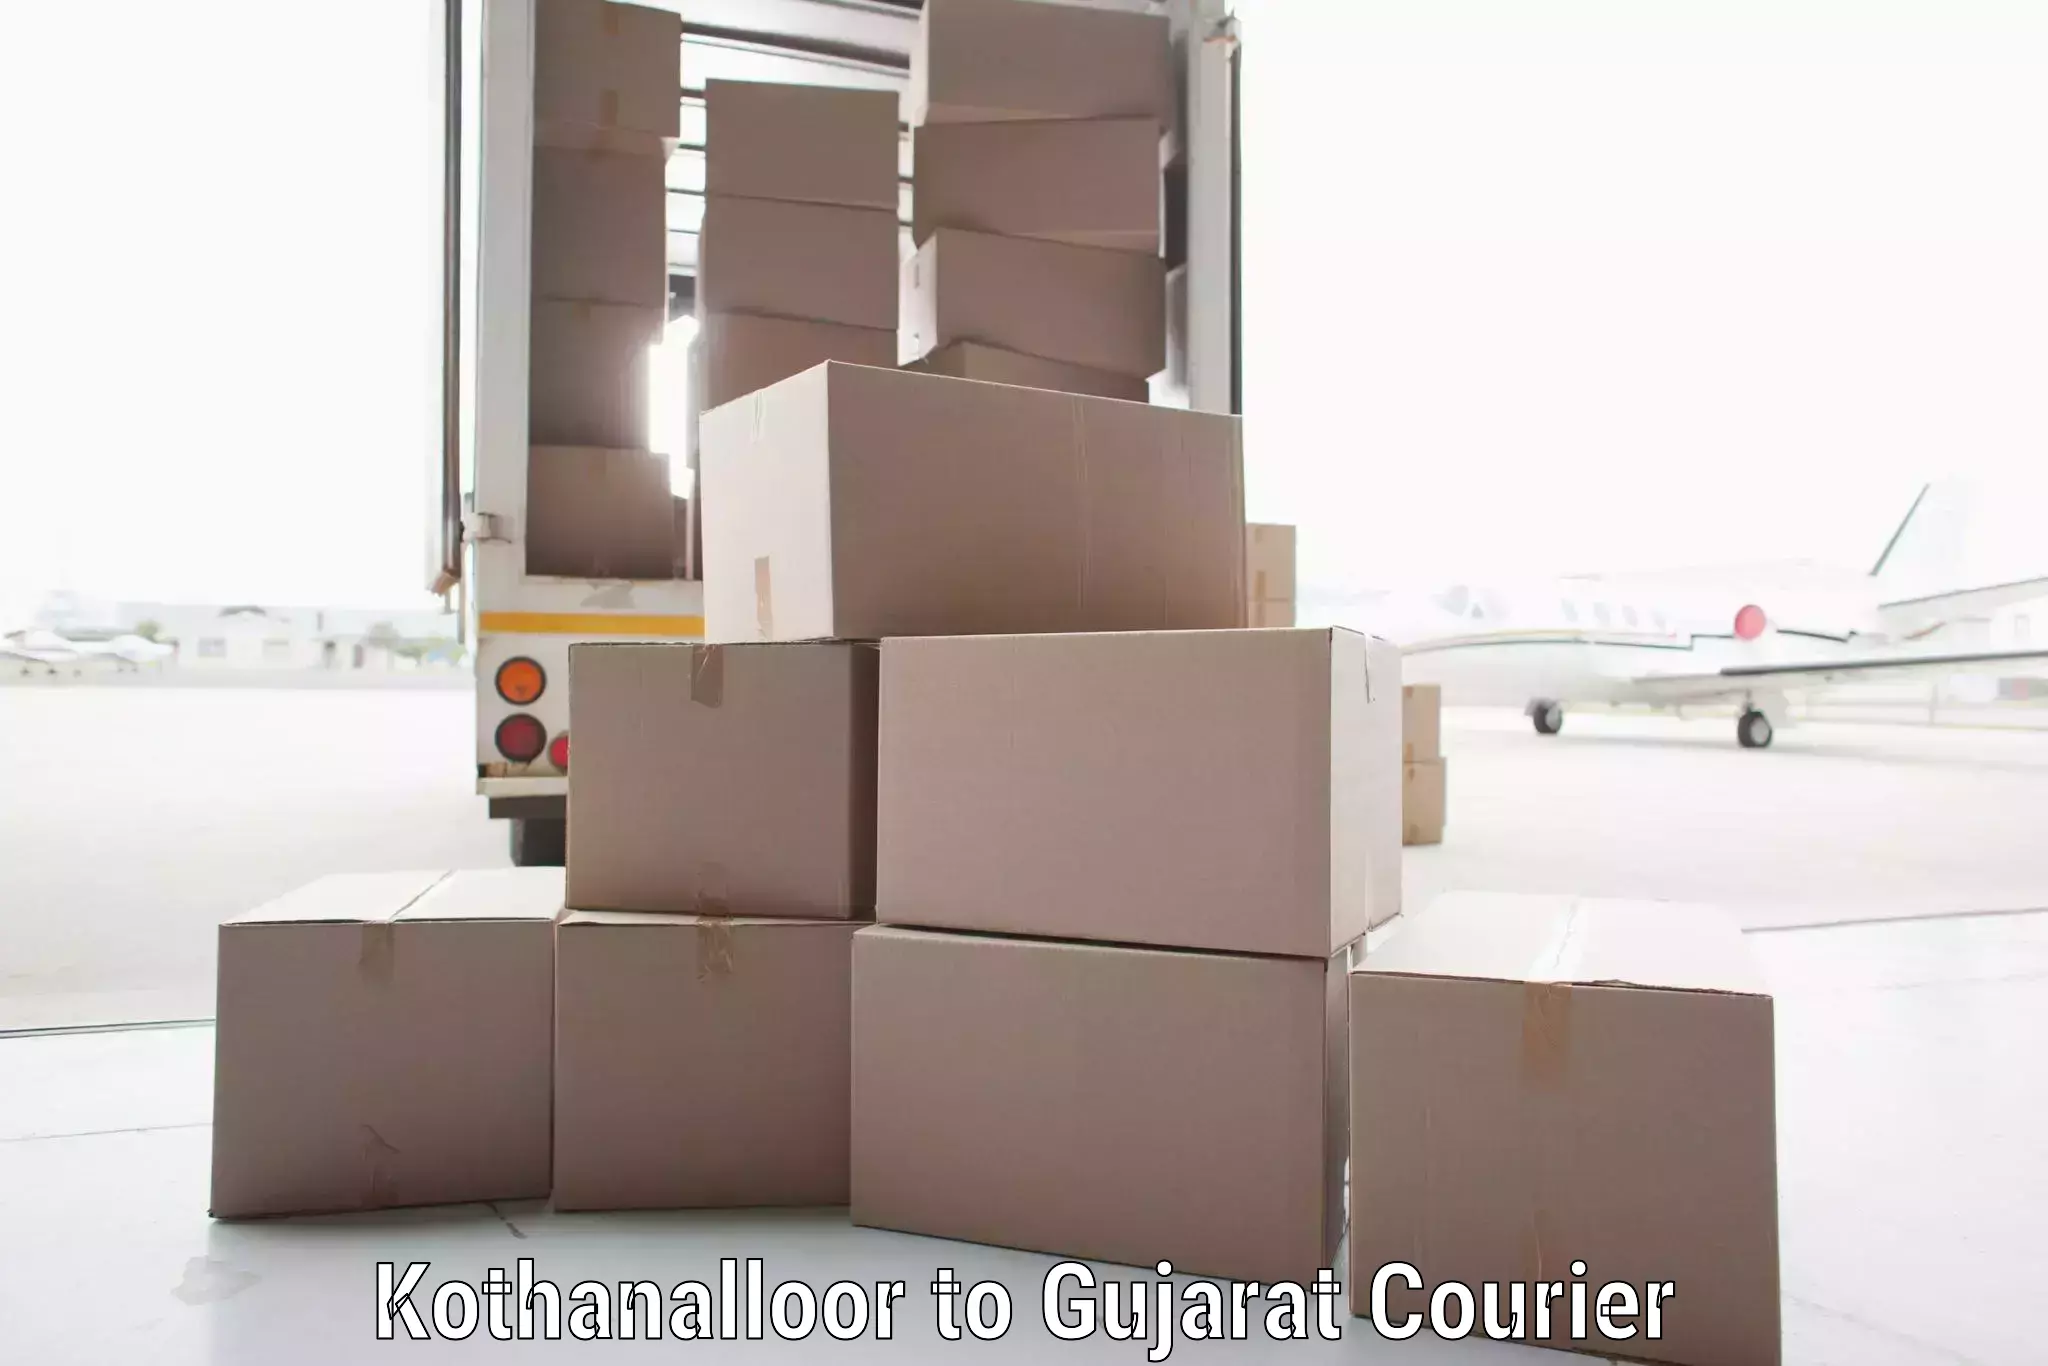 Reliable parcel services Kothanalloor to Ahmedabad